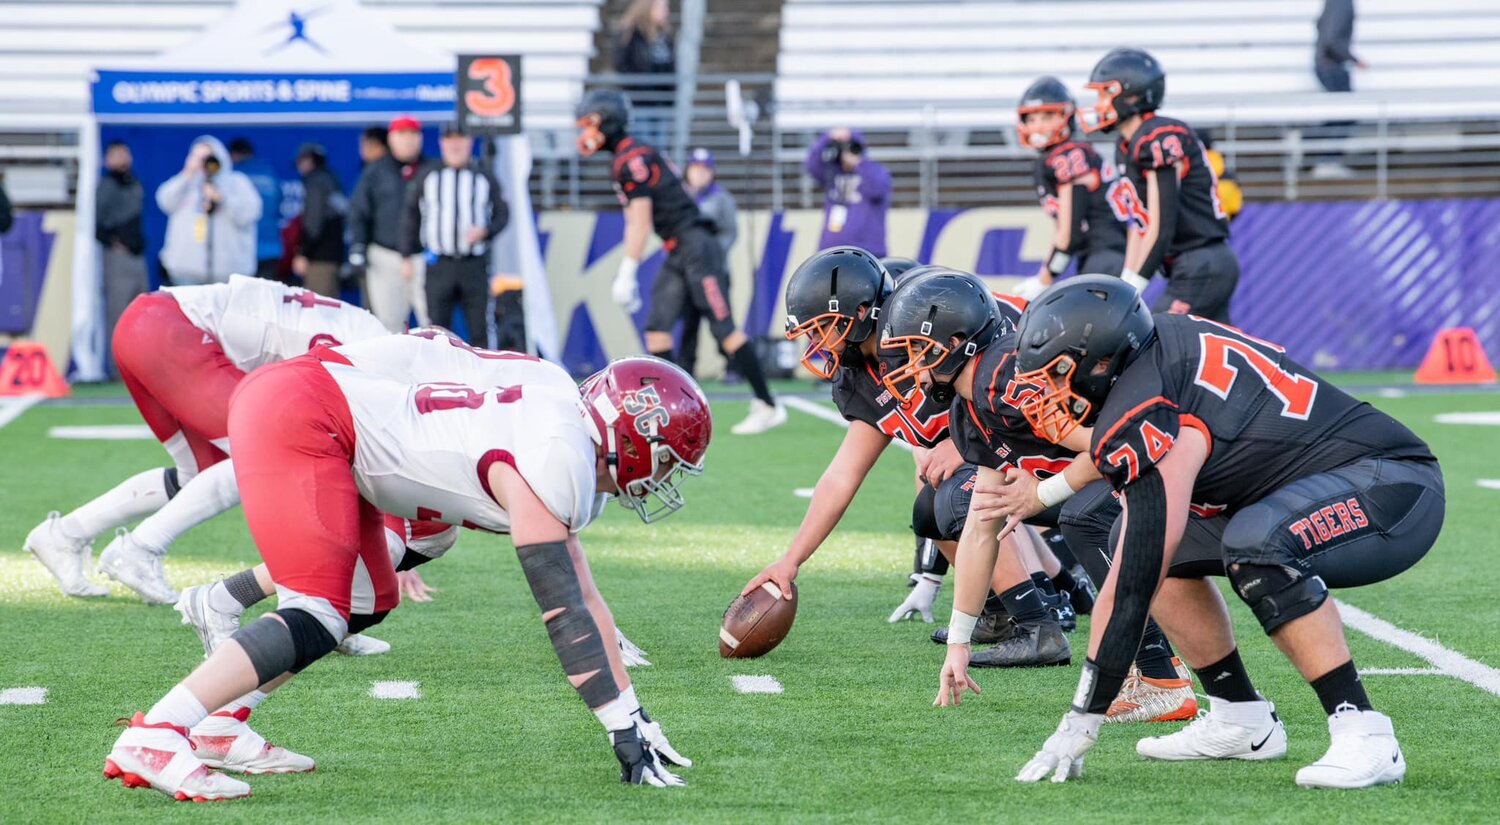 The Napavine Tigers line up against the Okanogan Bulldogs during the 2B state championship at Husky Stadium in Seattle on Dec. 2.